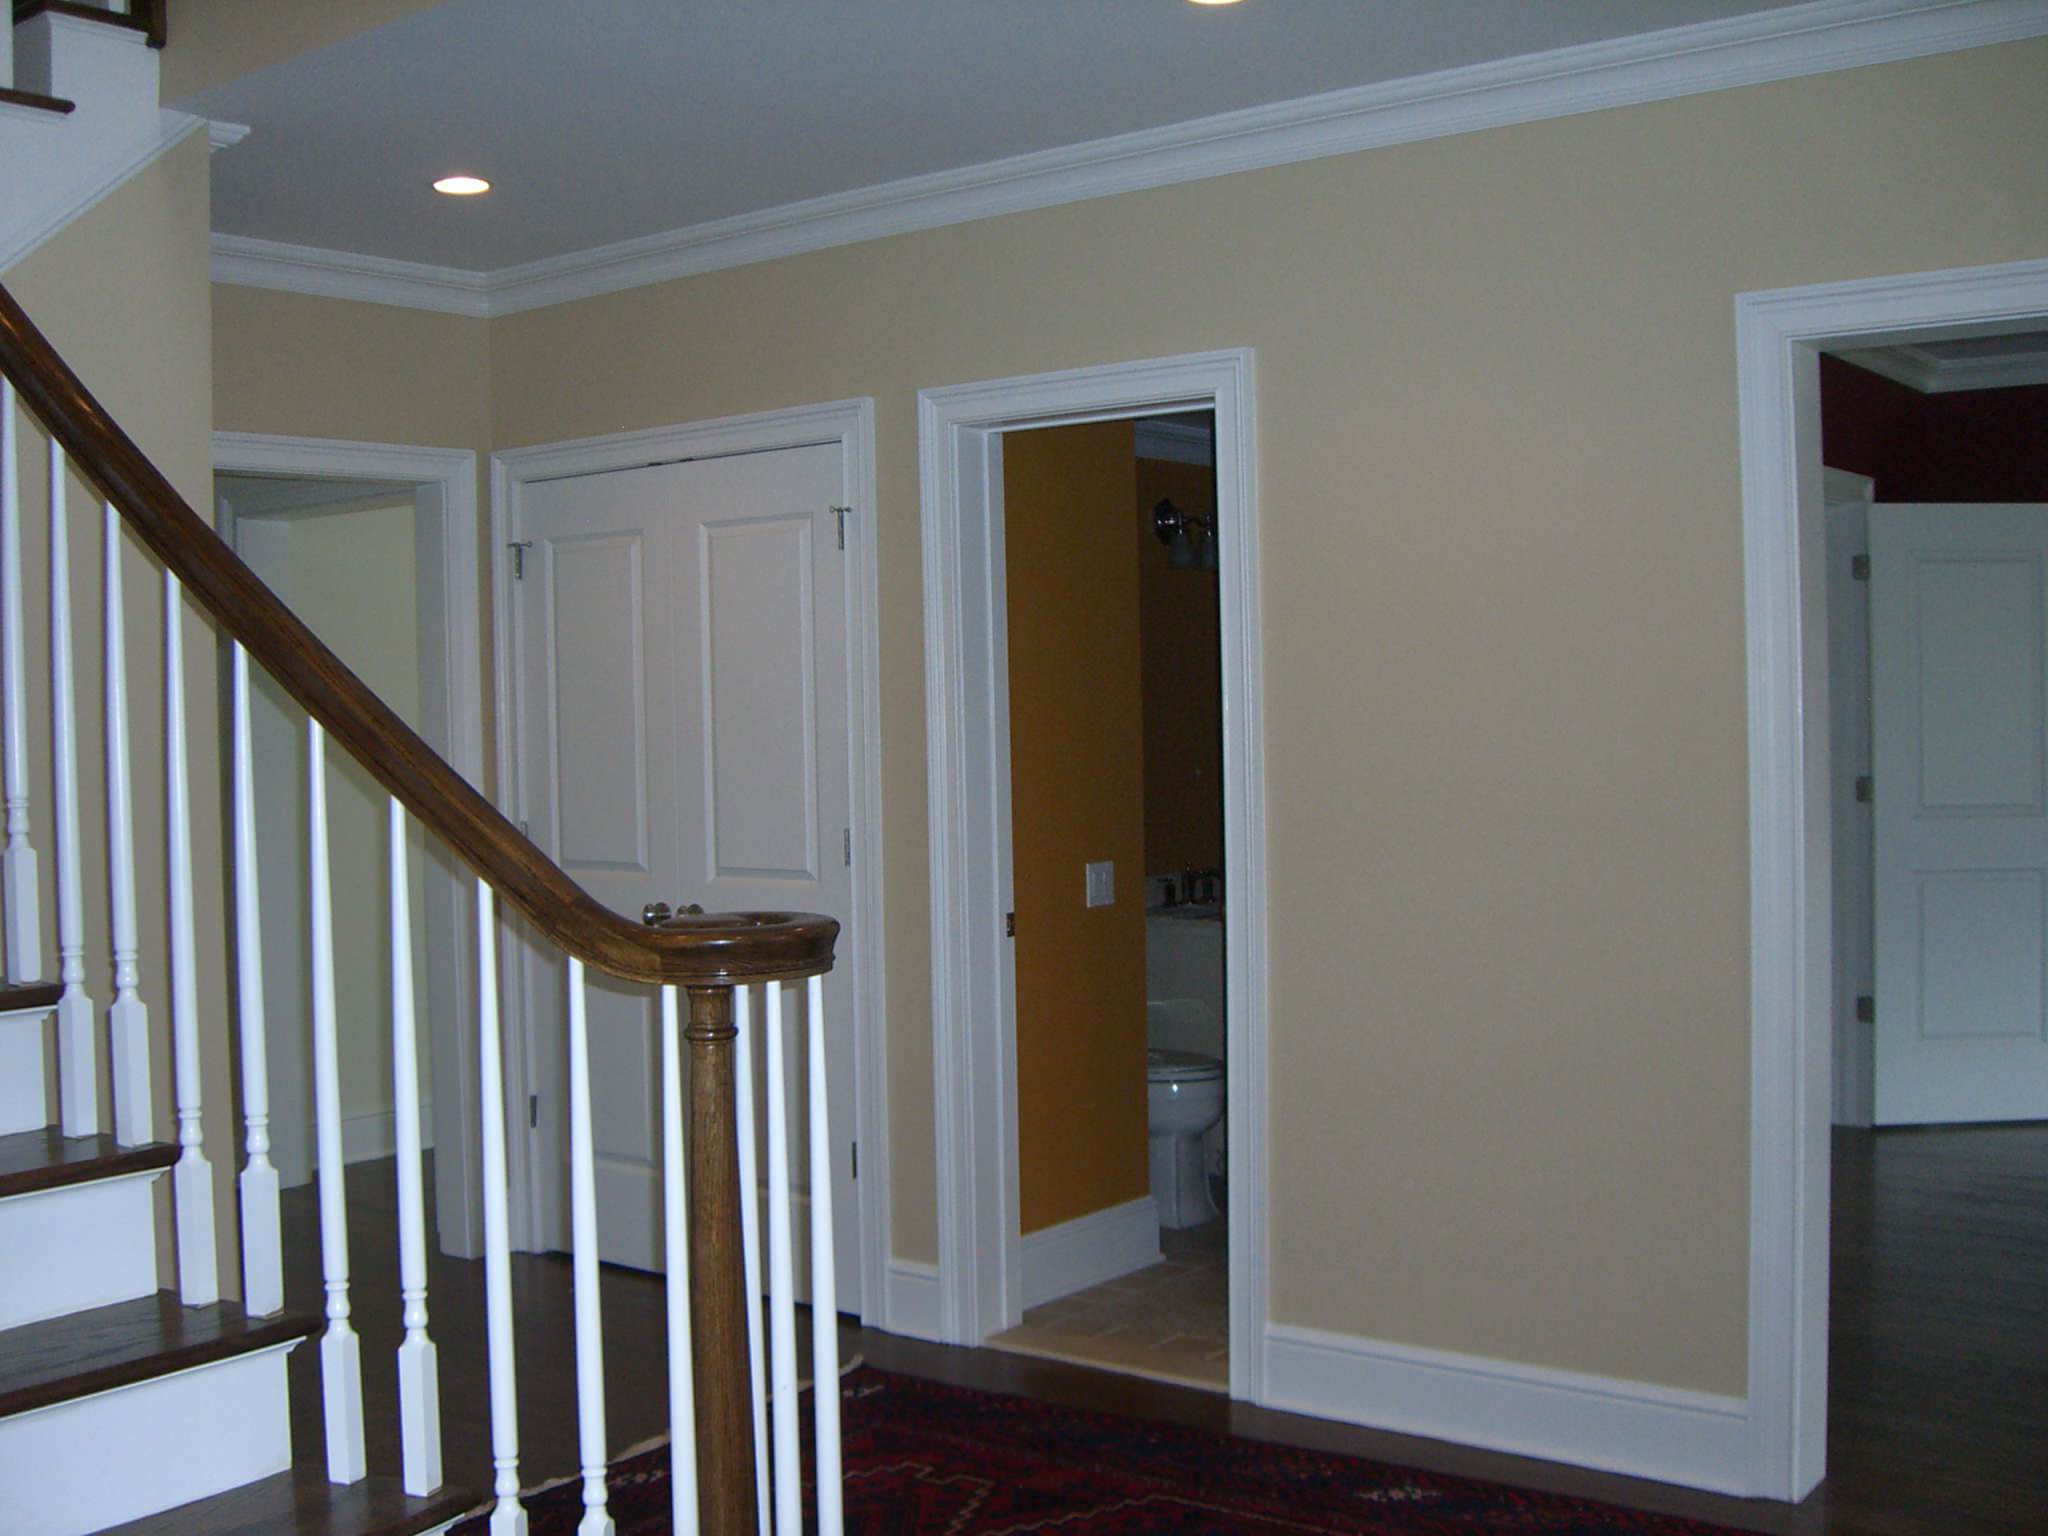 Scarsdale, NY interior paint